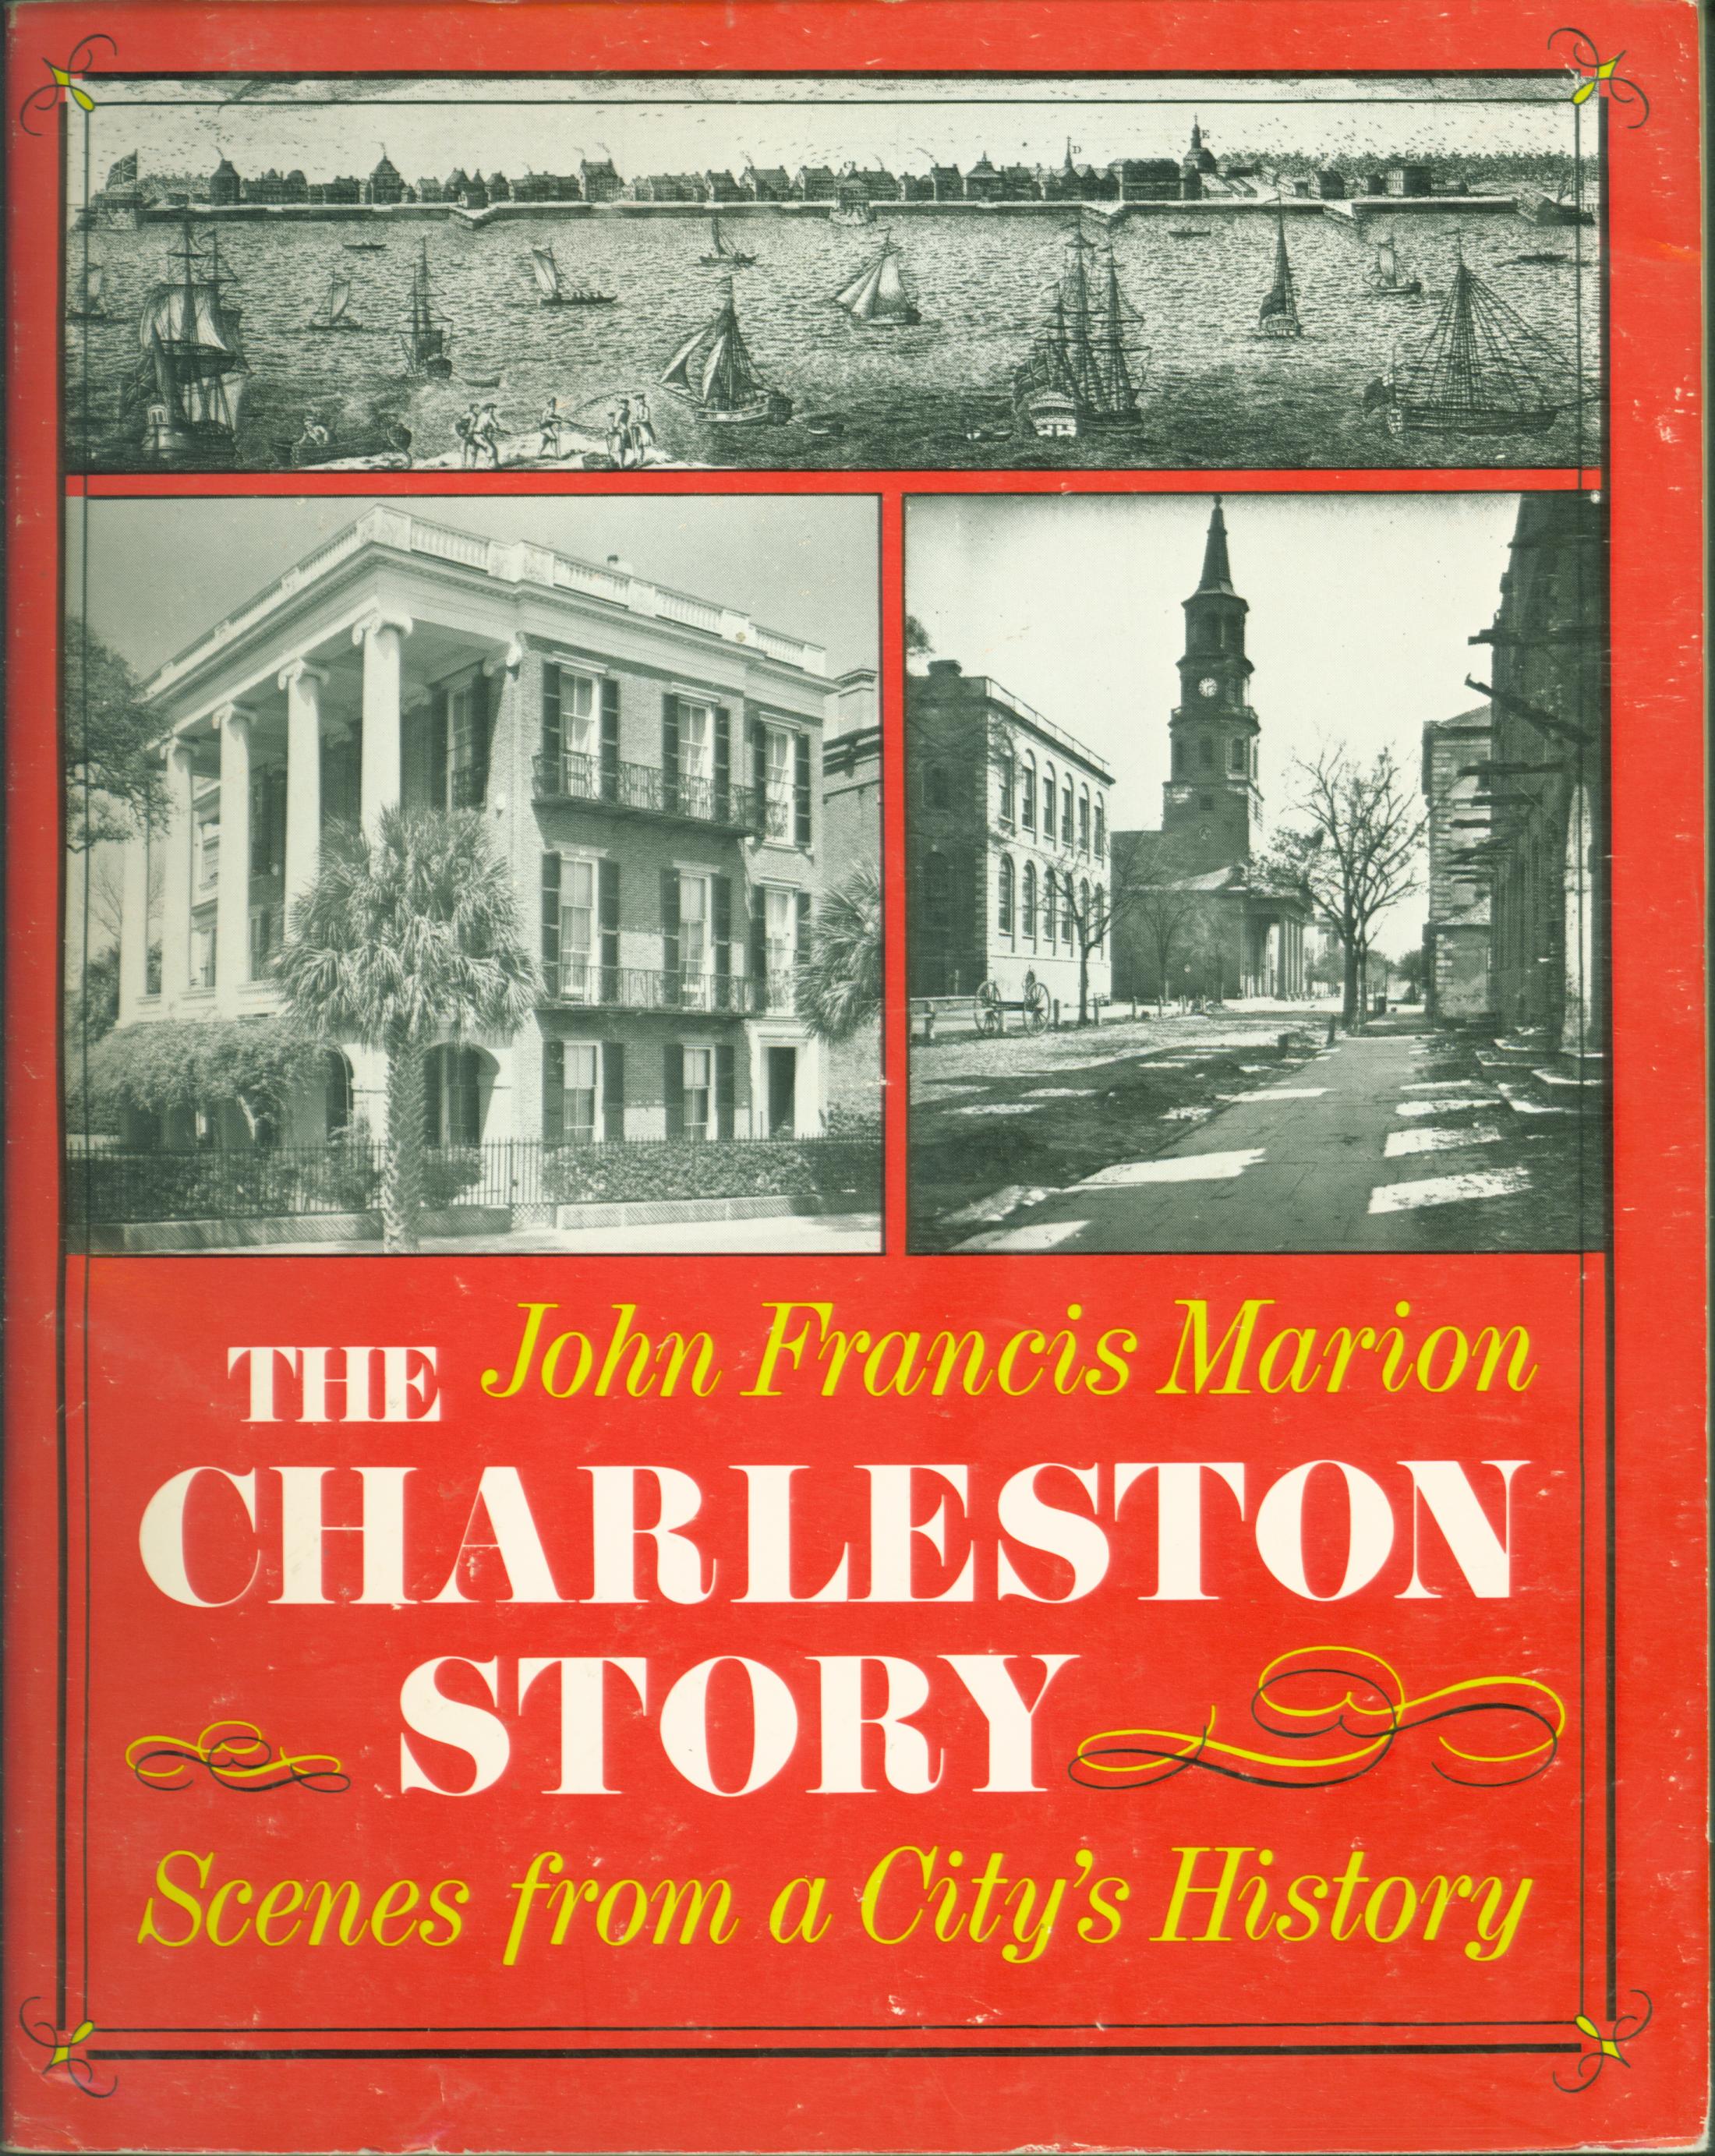 THE CHARLESTON STORY: scenes from a city's history.